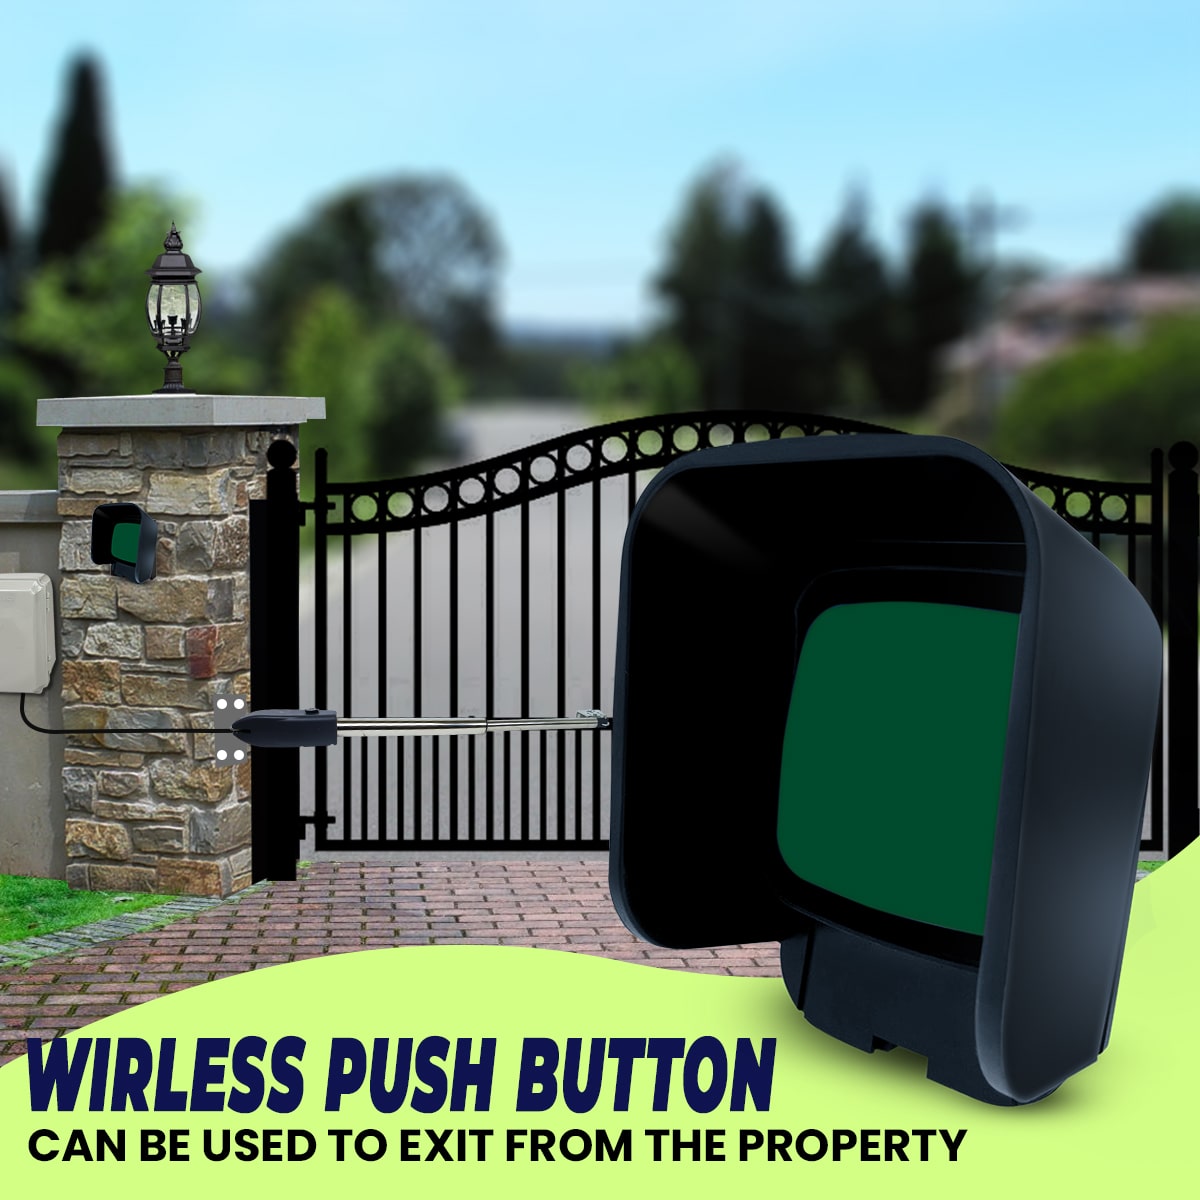 Automatic, Single Swing, Gate Opener Kit ,Full Solar Powered with push button, gatomate